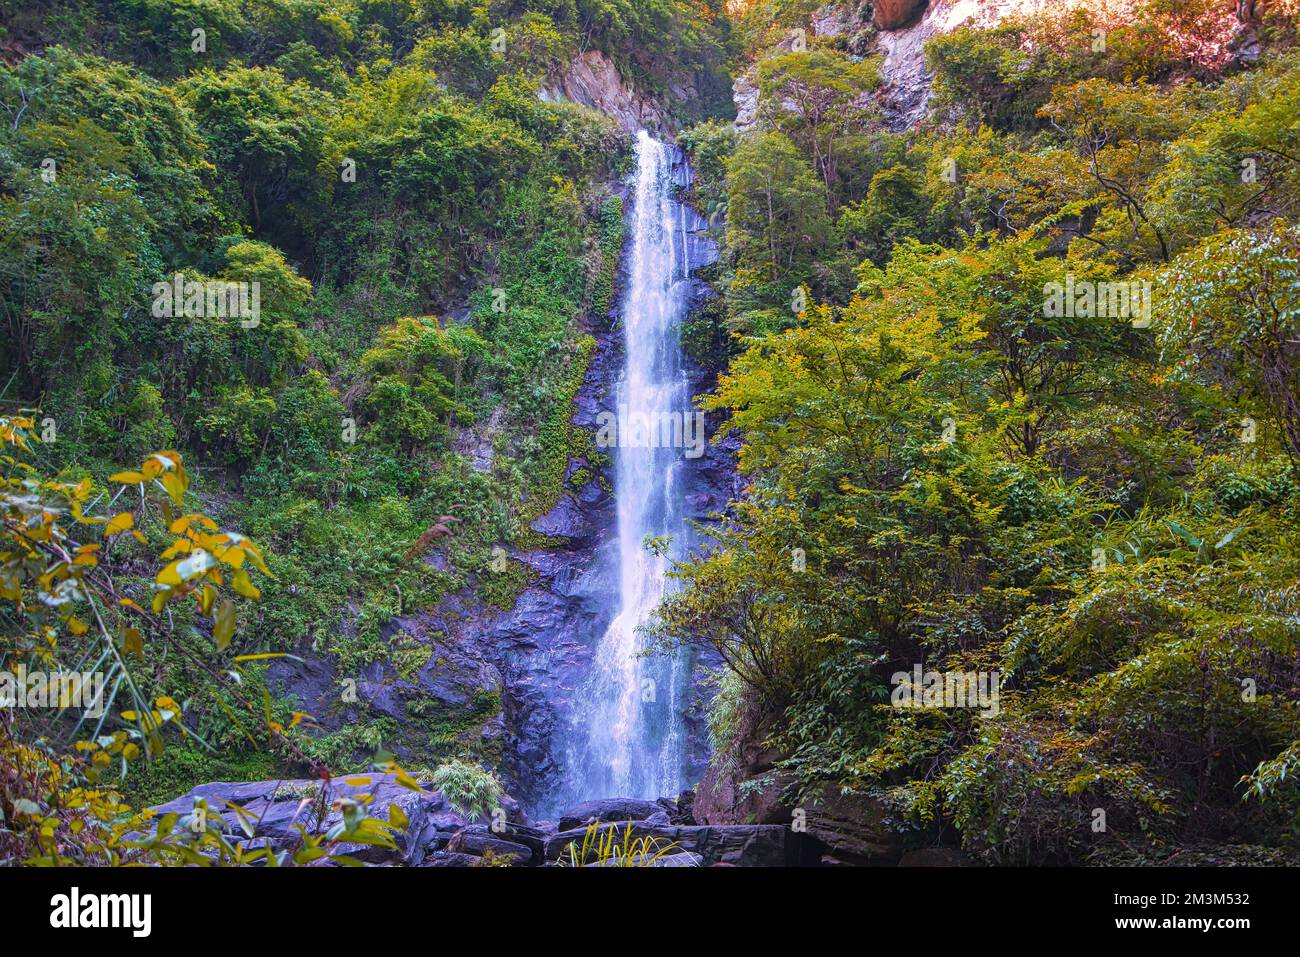 Among the lush vegetation, there is a white waterfall. 30 hectares of rice cultivation area. Yushan Nan'an Visitor Center, Hualien, Taiwan. 2022 Stock Photo